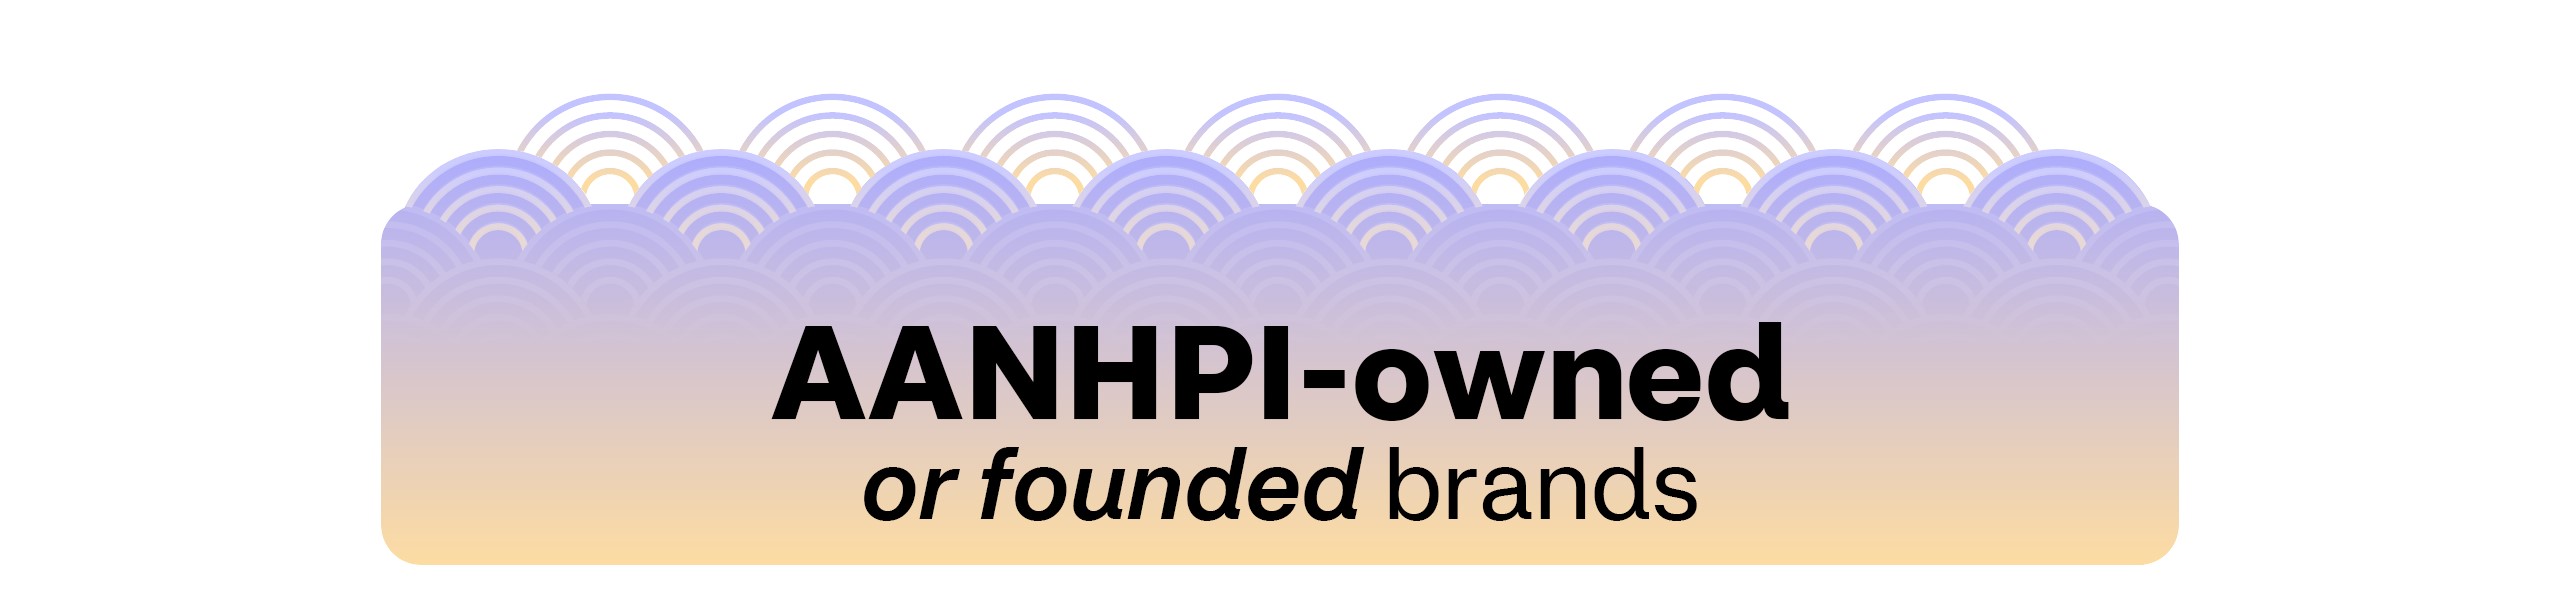 AANHPI-owned or founded brands